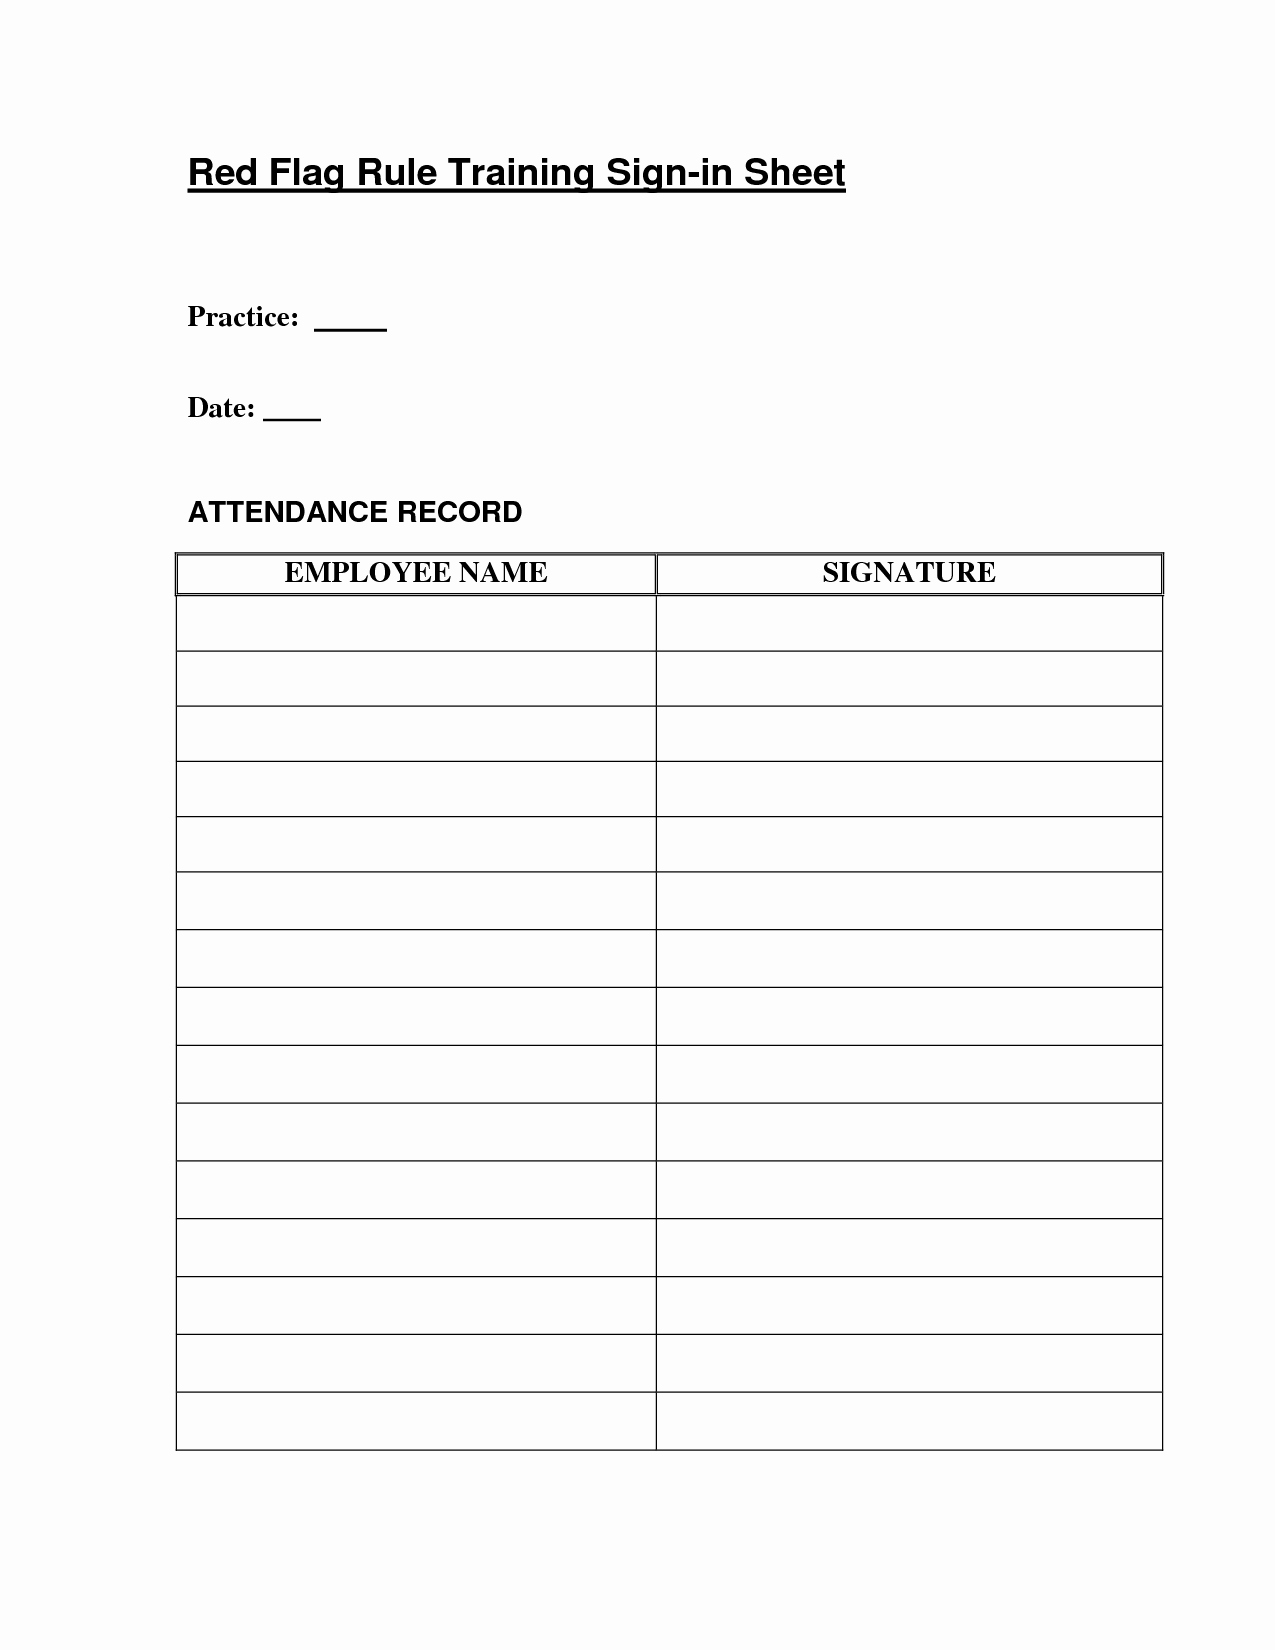 Staff Sign In Sheet Template Fresh Best S Of Training Sign In Sheet Template Safety